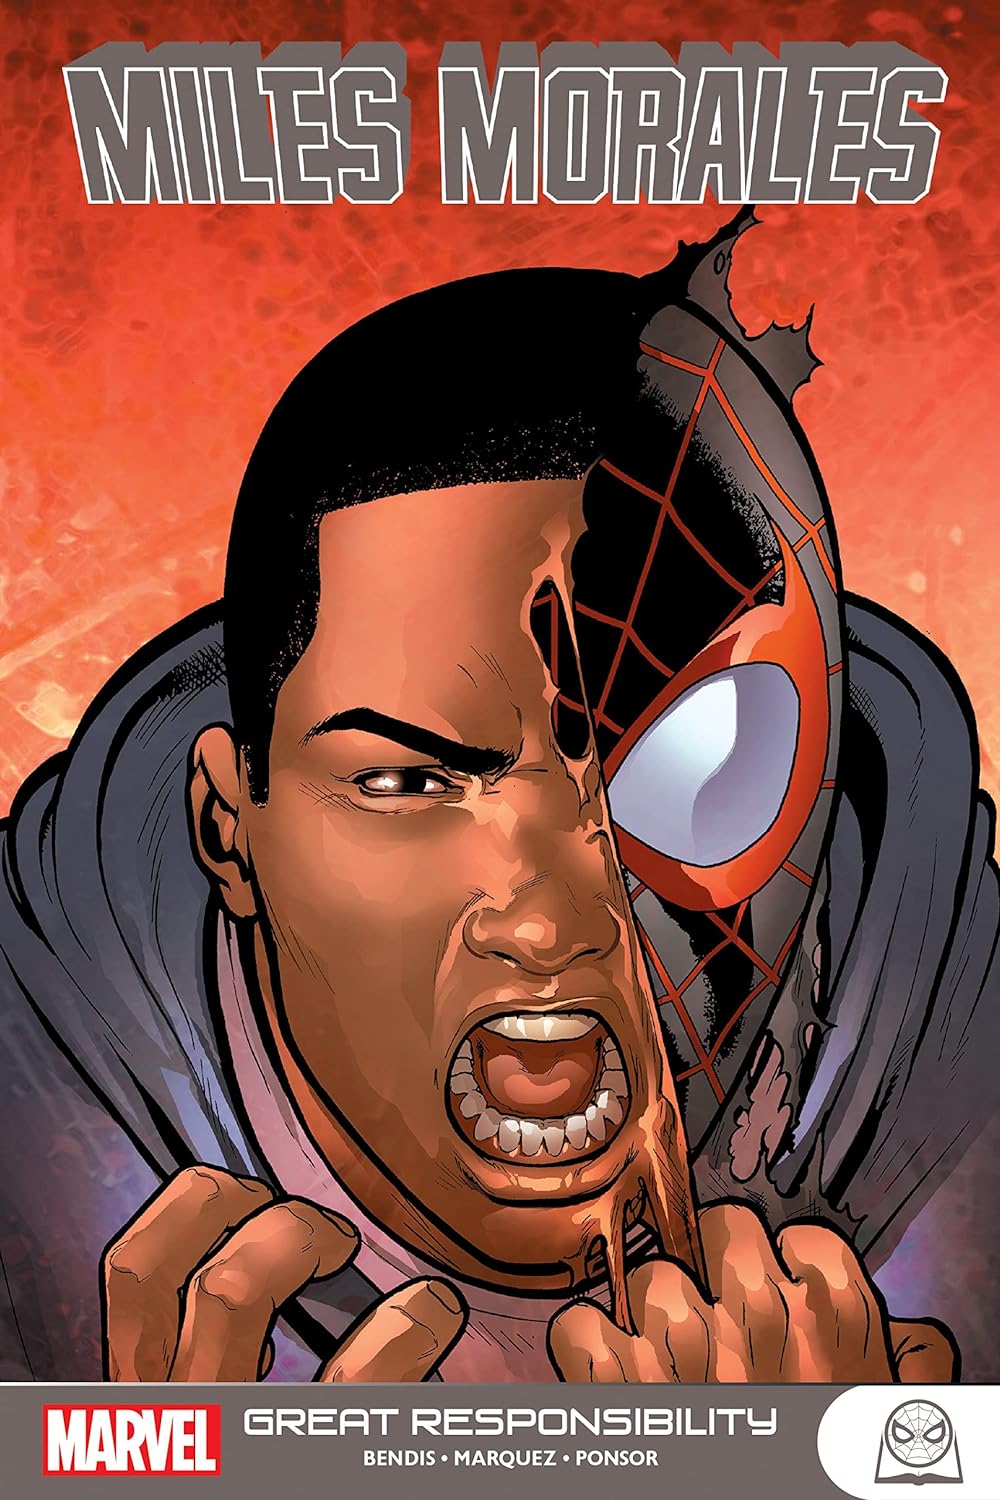 MILES MORALES: GREAT RESPONSIBILITY